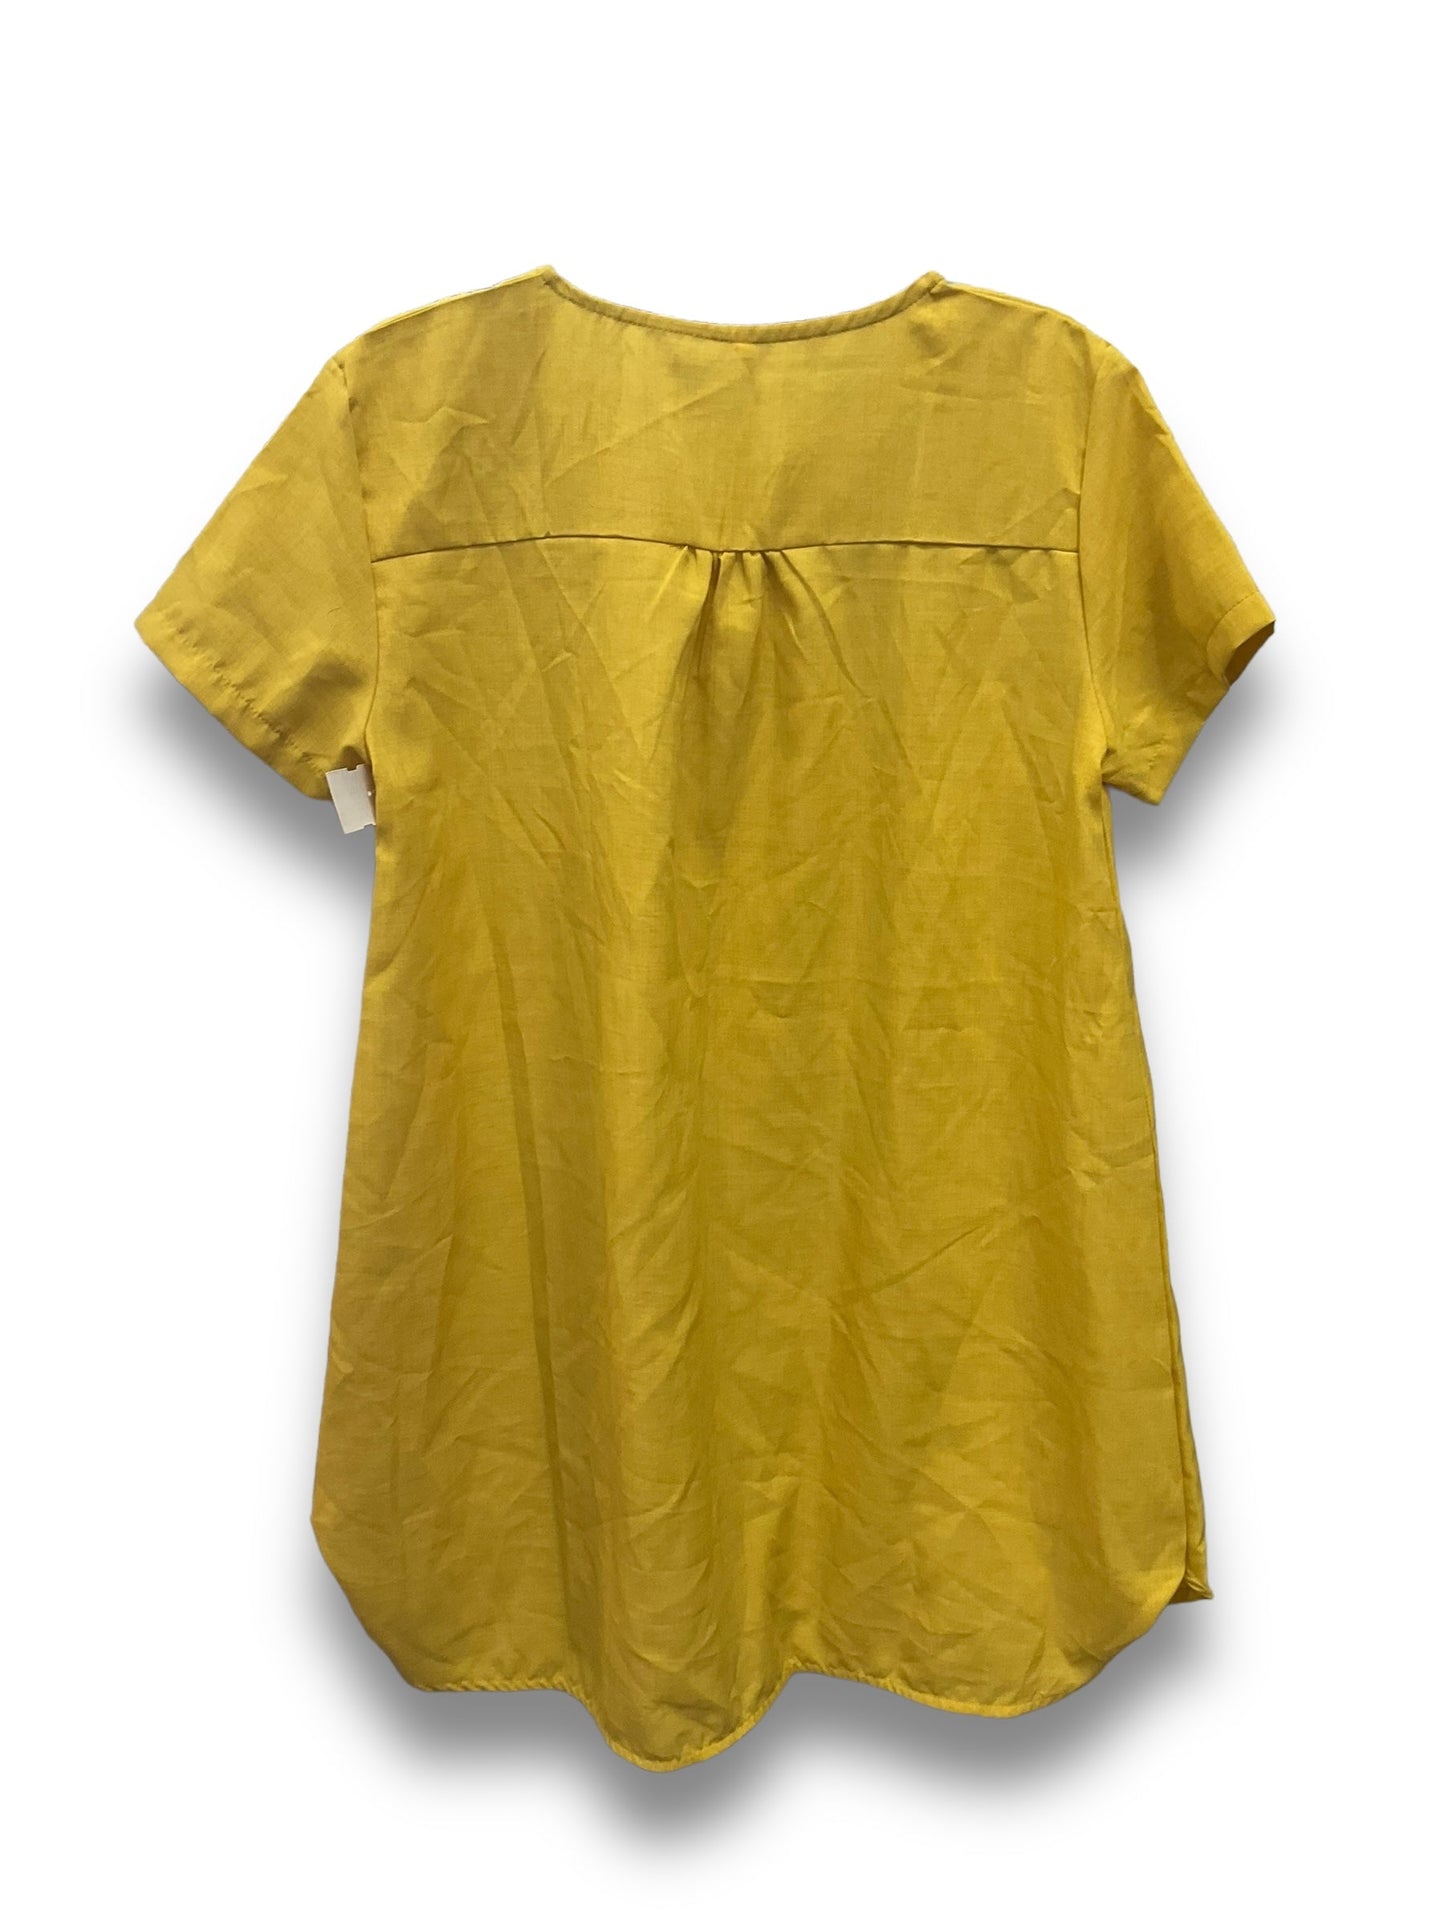 Yellow Dress Casual Short Clothes Mentor, Size 2x